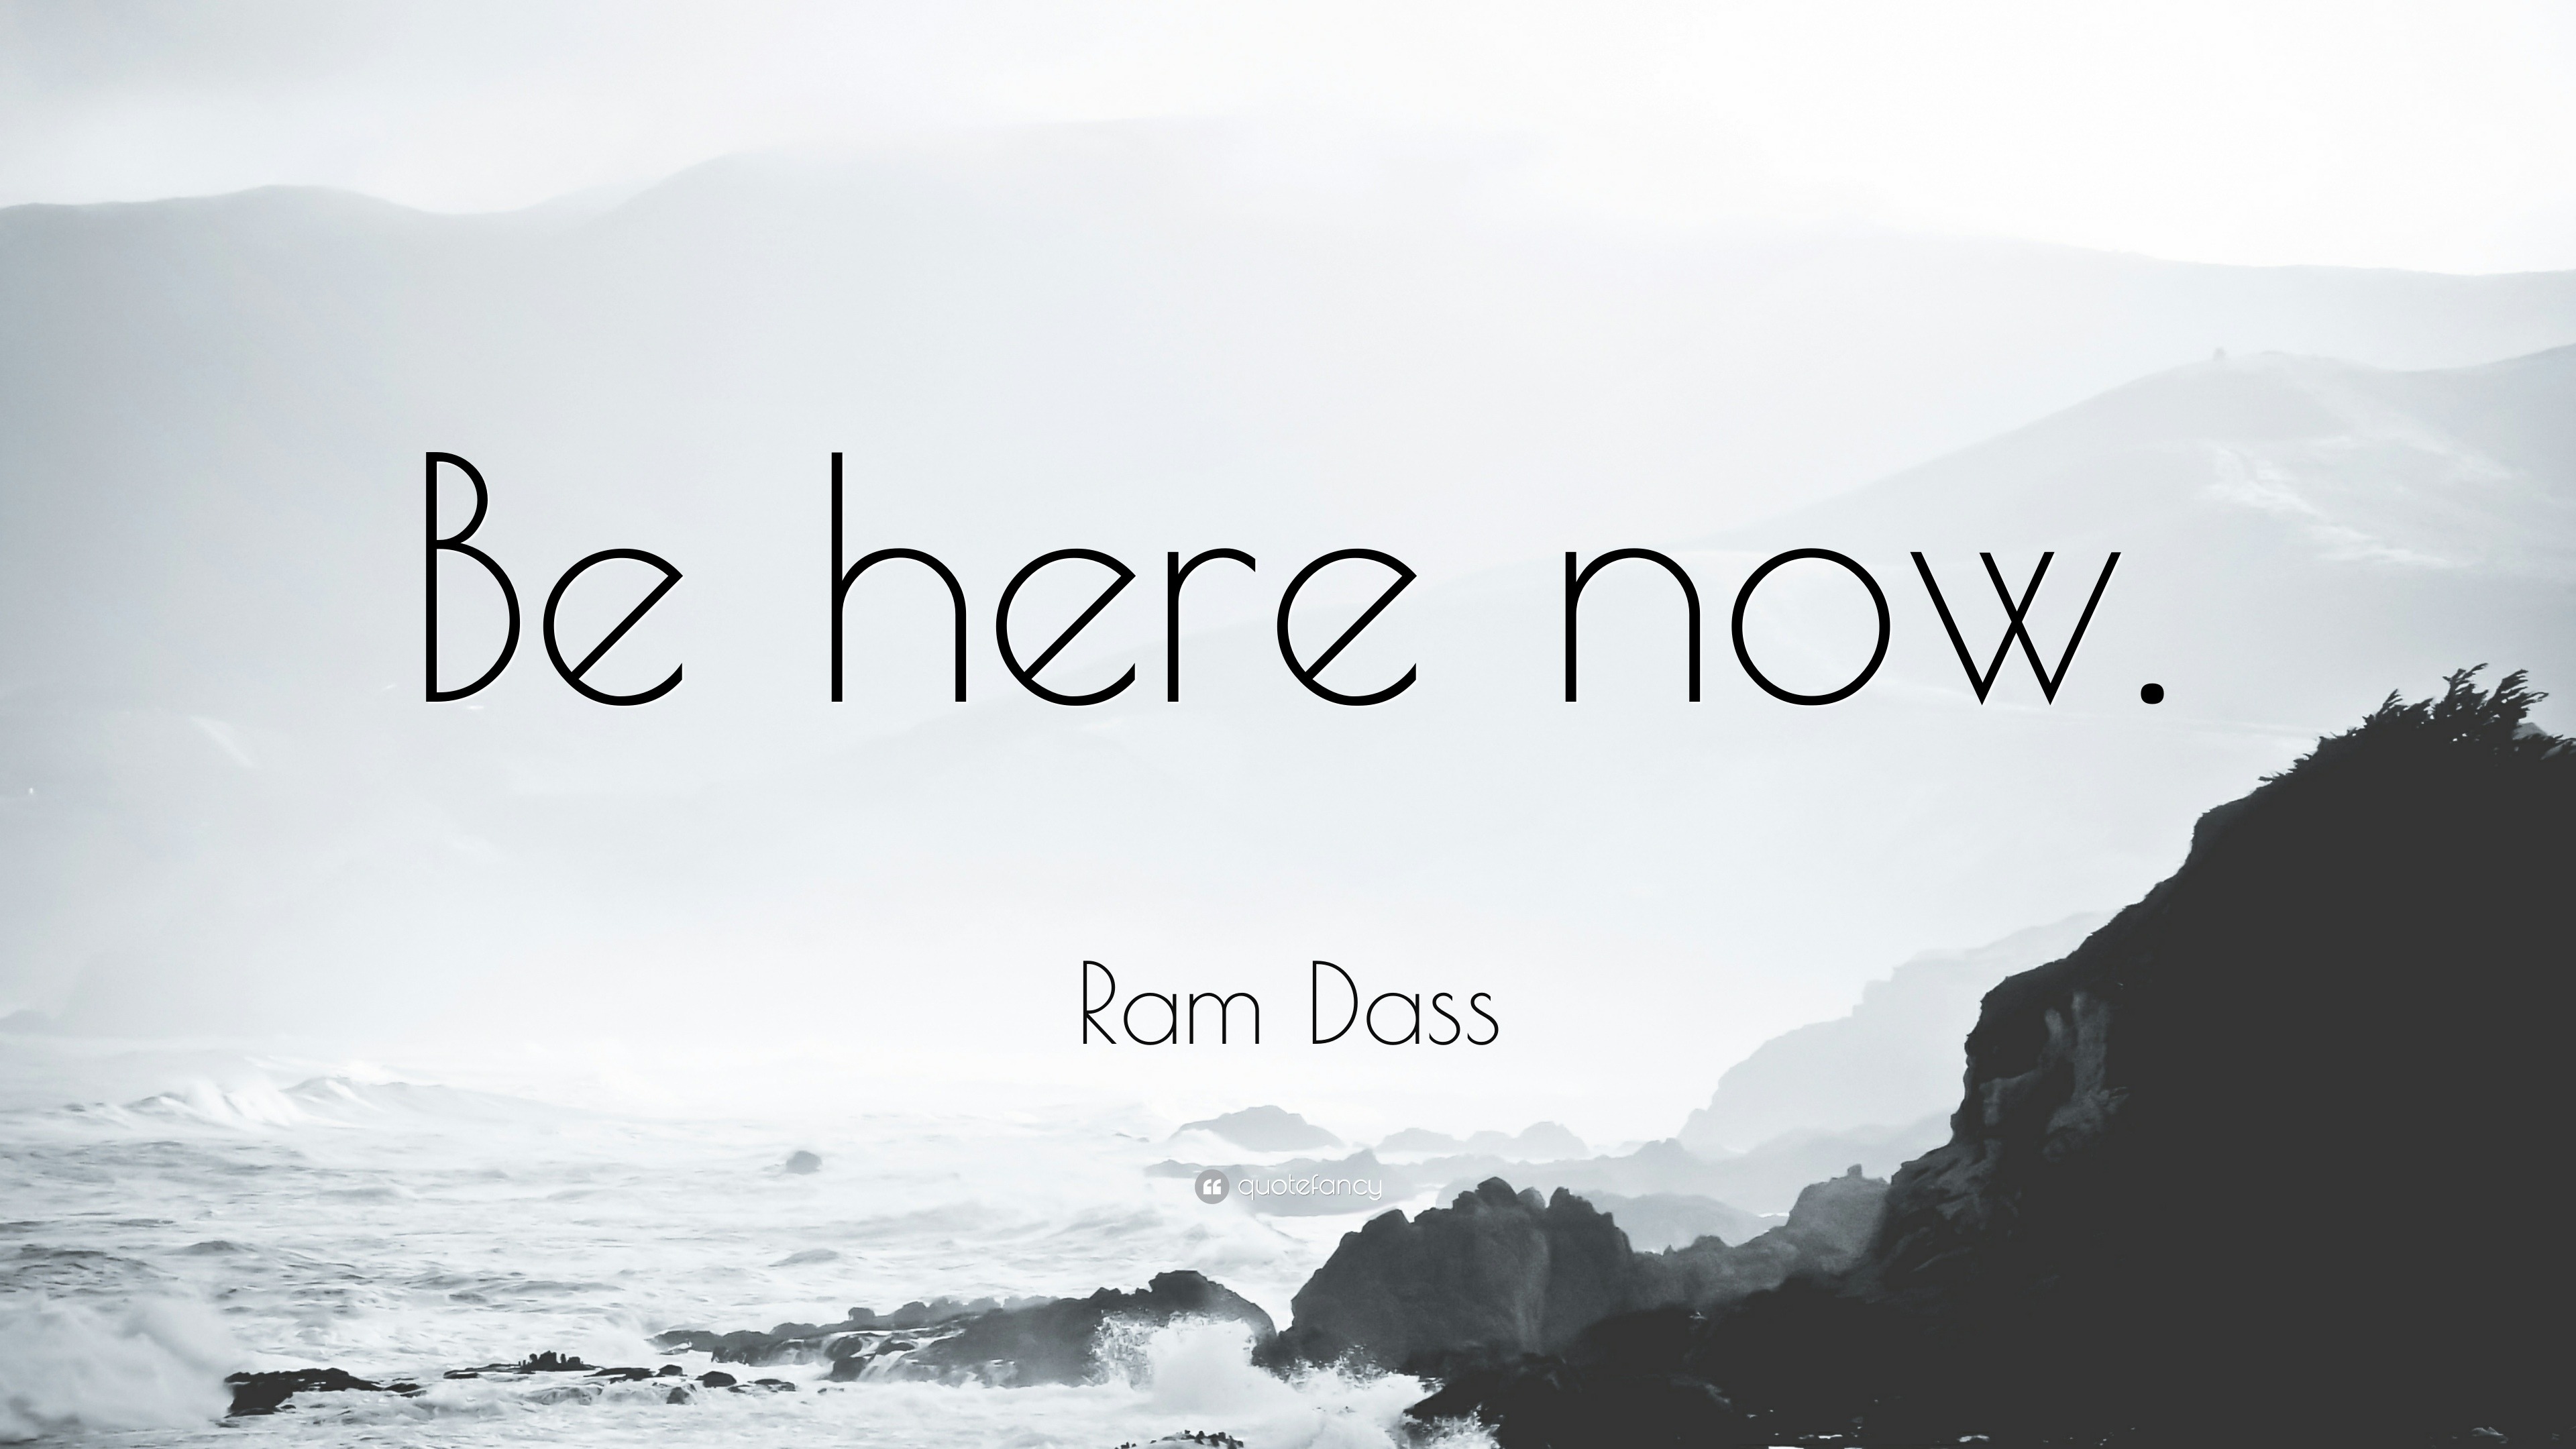 Ram Dass Quote Be Here Now 26 Wallpapers Quotefancy